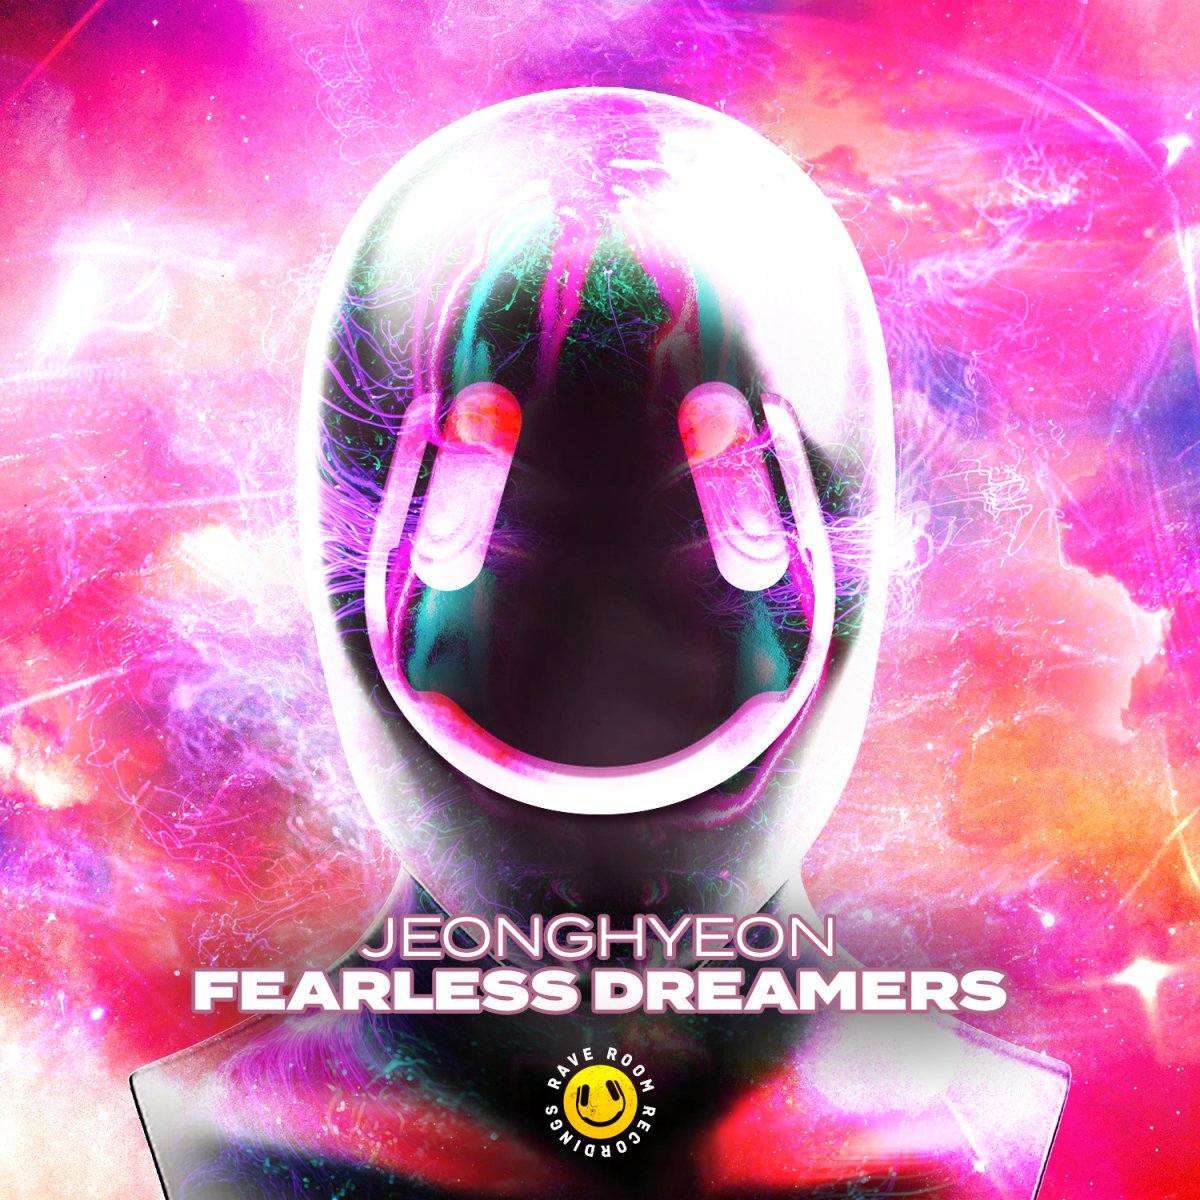 Fearless Dreamers - Jeonghyeon⁠ 